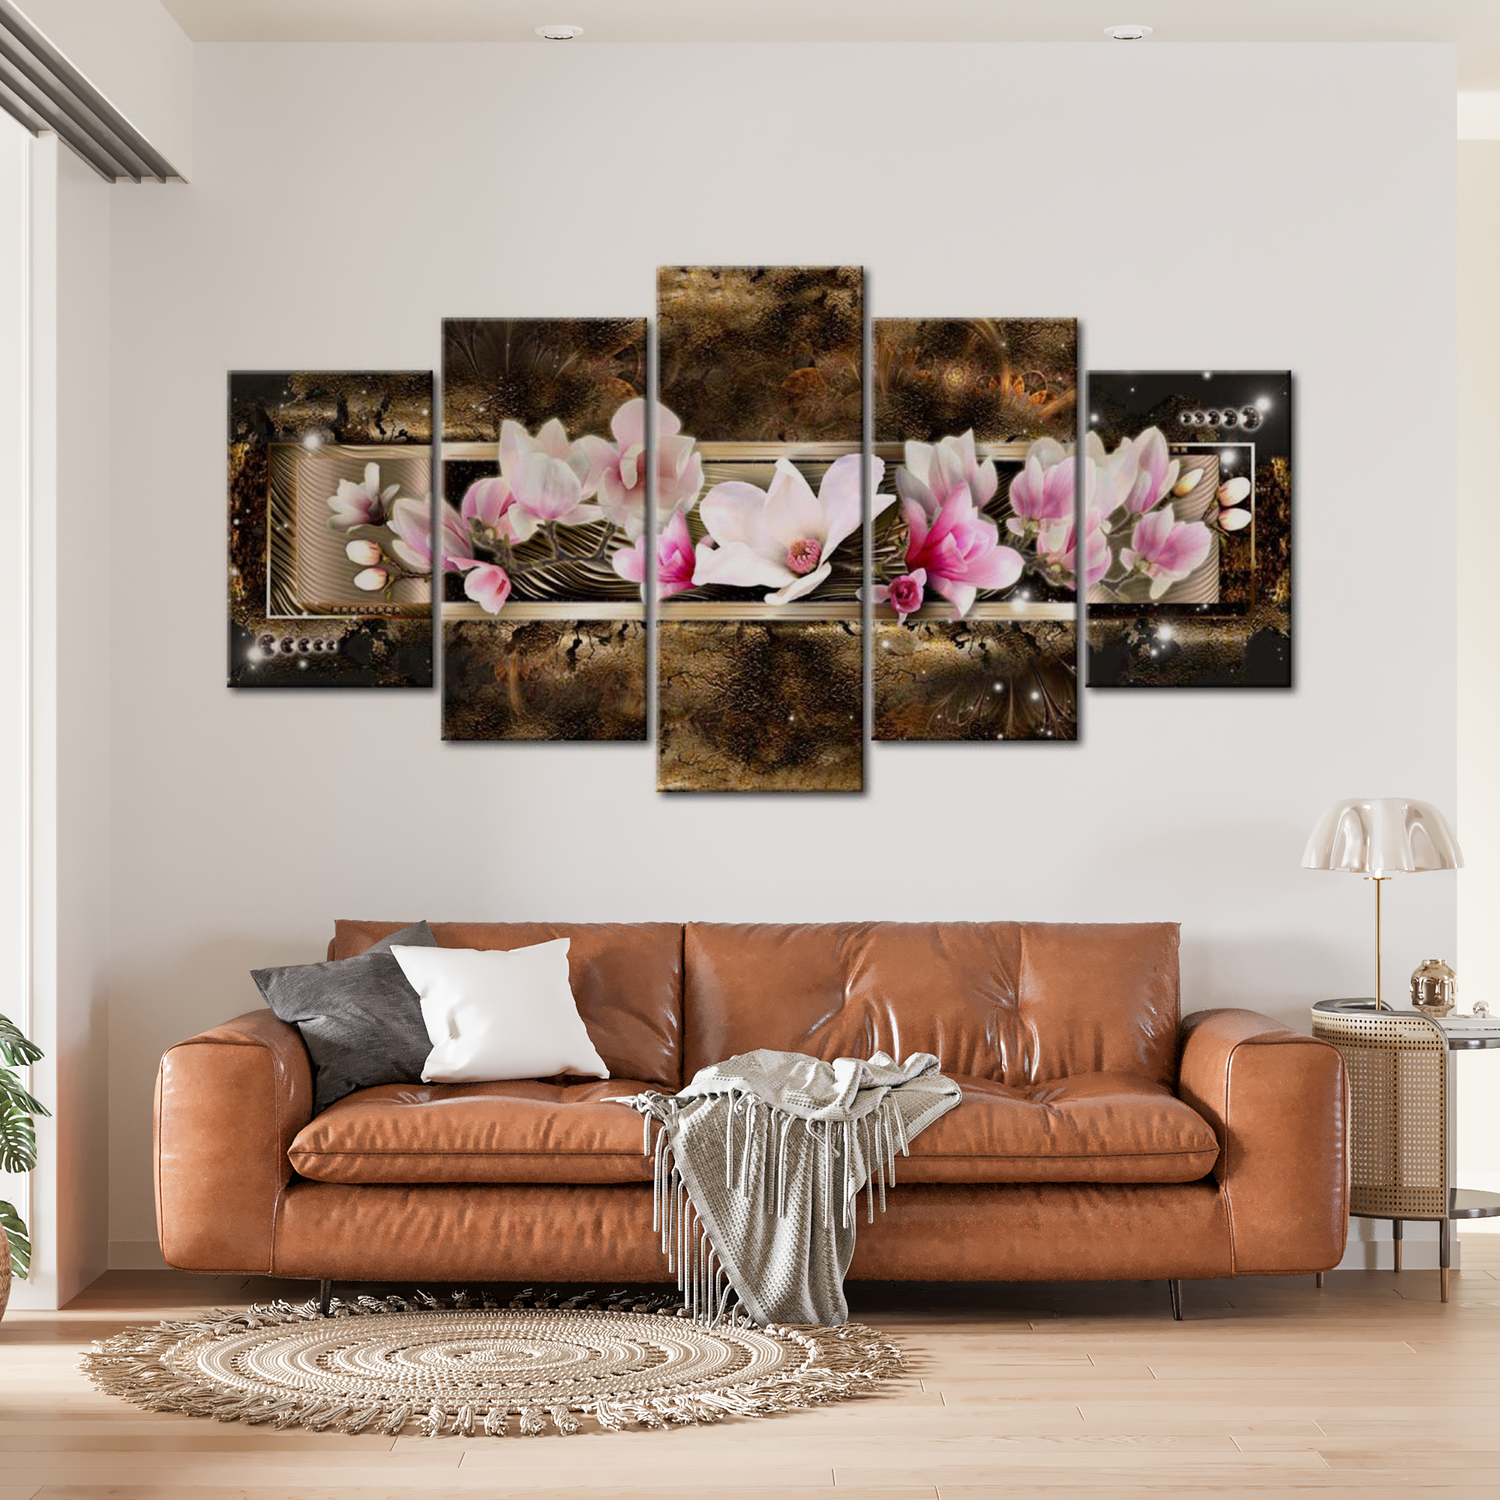 Stretched Canvas Floral Art - The Dream Of A Magnolia 40"Wx20"H